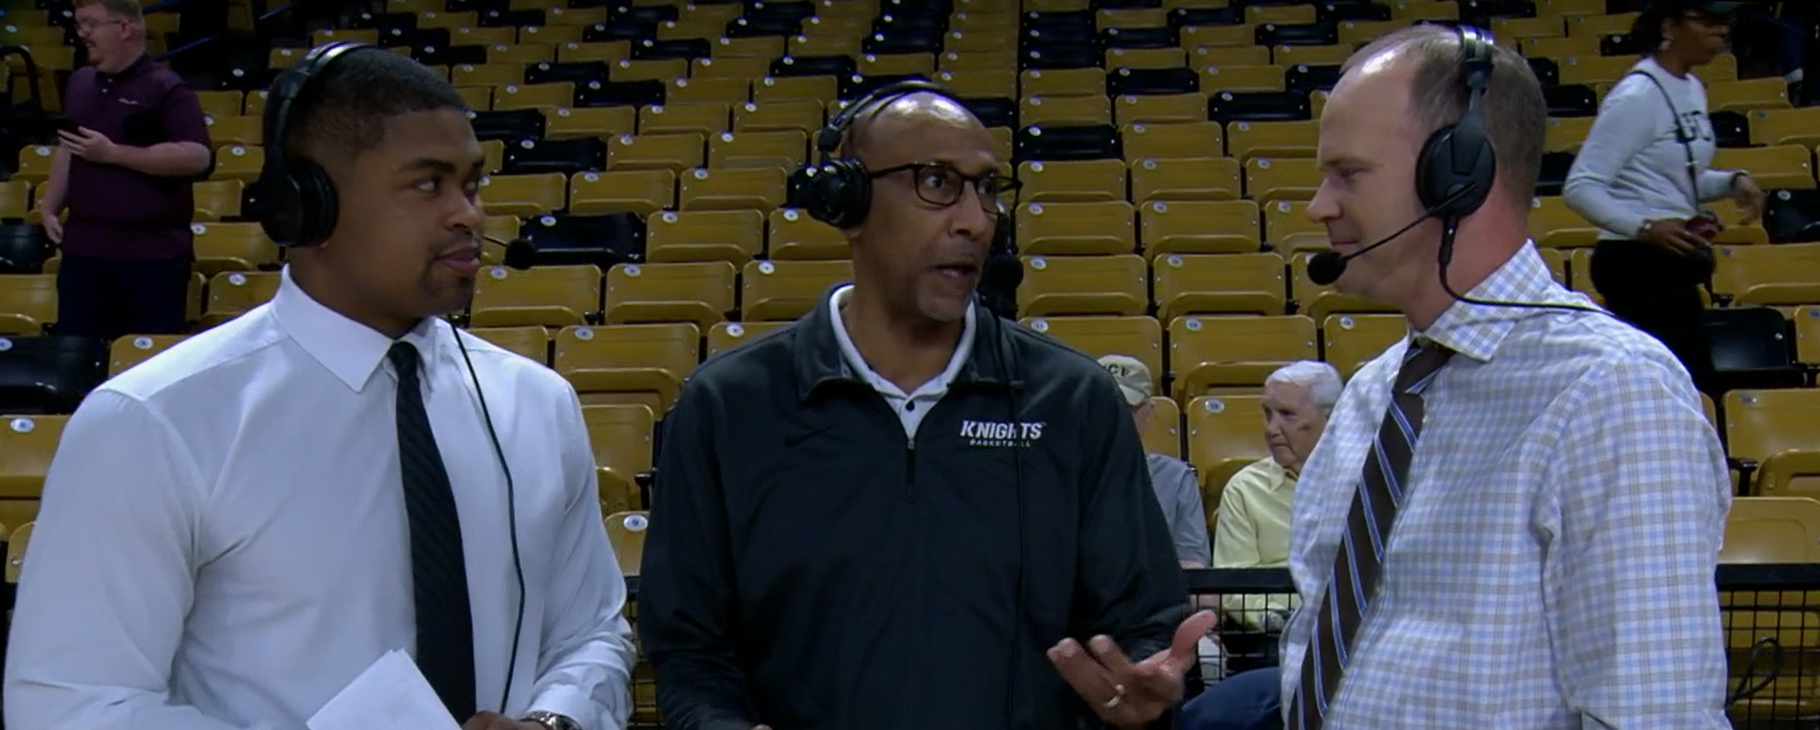 Postgame Interview: Head Coach Johnny Dawkins After UCF's 94-52 Win Over Jacksonville - UCF Athletics - Official Athletics Website